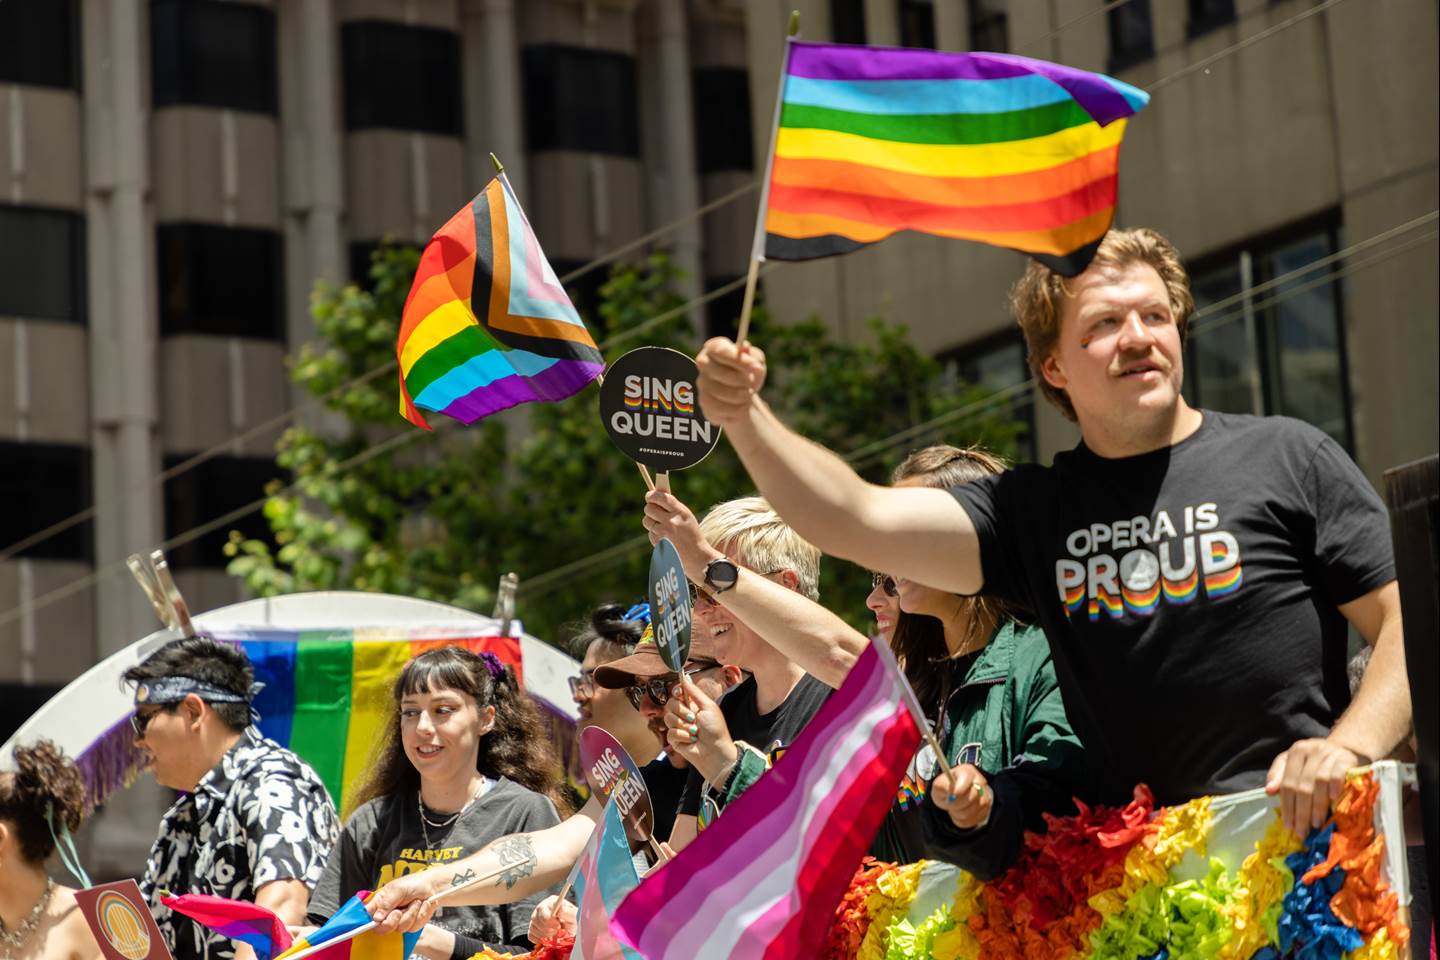 SFO cast members on the float waving colorful flags and signs that say &quot;Opera is Proud&quot; and &quot;Sing Queen&quot; in the 2023 Pride Parade.